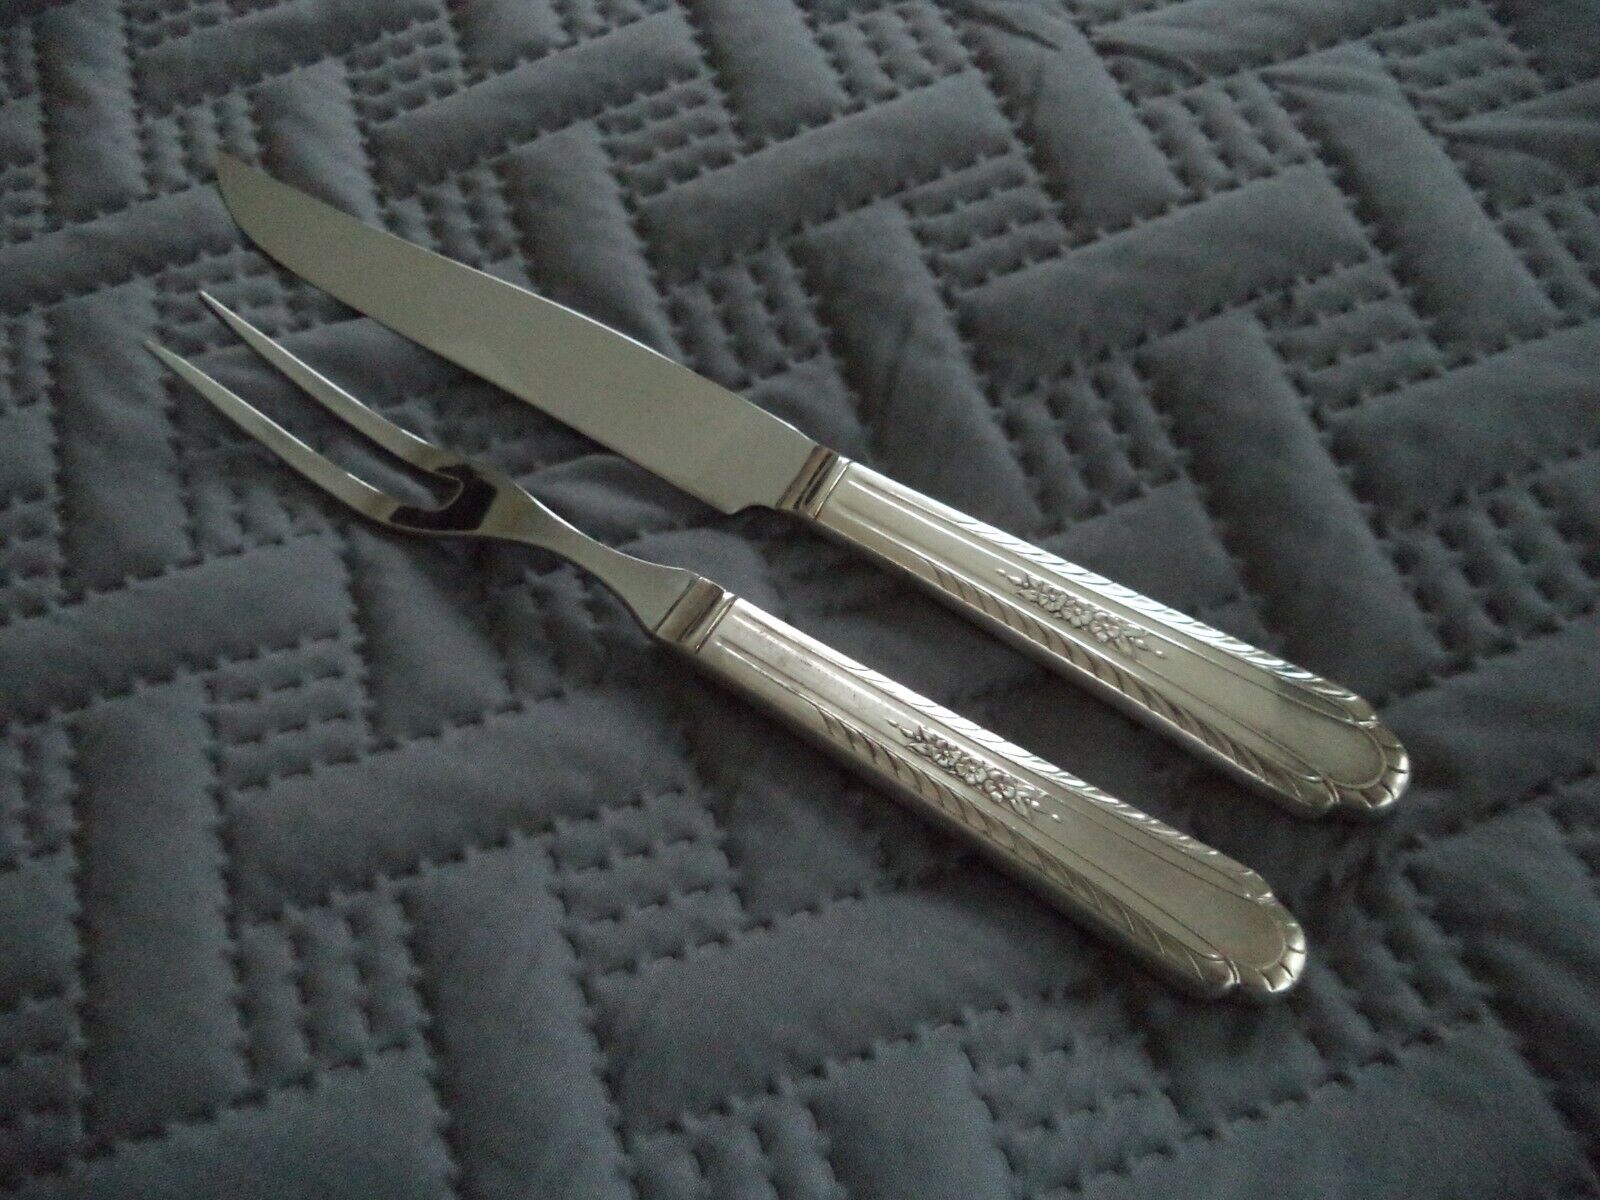 Silverplate meat carving set knife fork Wentworth 1950s by Holmes & Tuttle 1950s